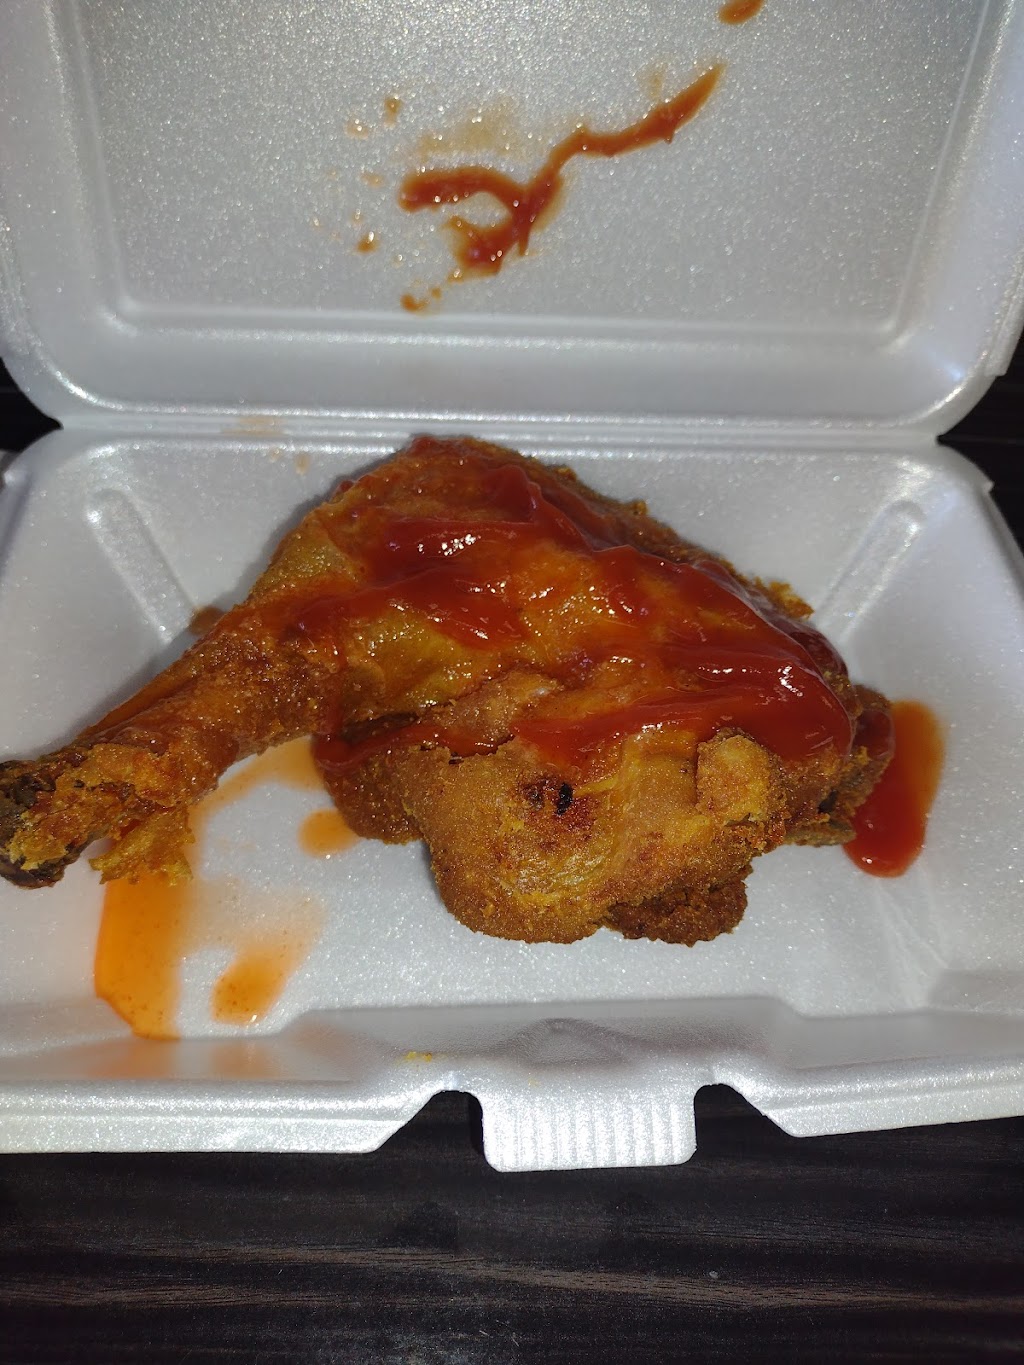 Parkview Pizza Fried Chicken & Cold Beer | 603 Cedar Ave, Yeadon, PA 19050 | Phone: (610) 623-1200